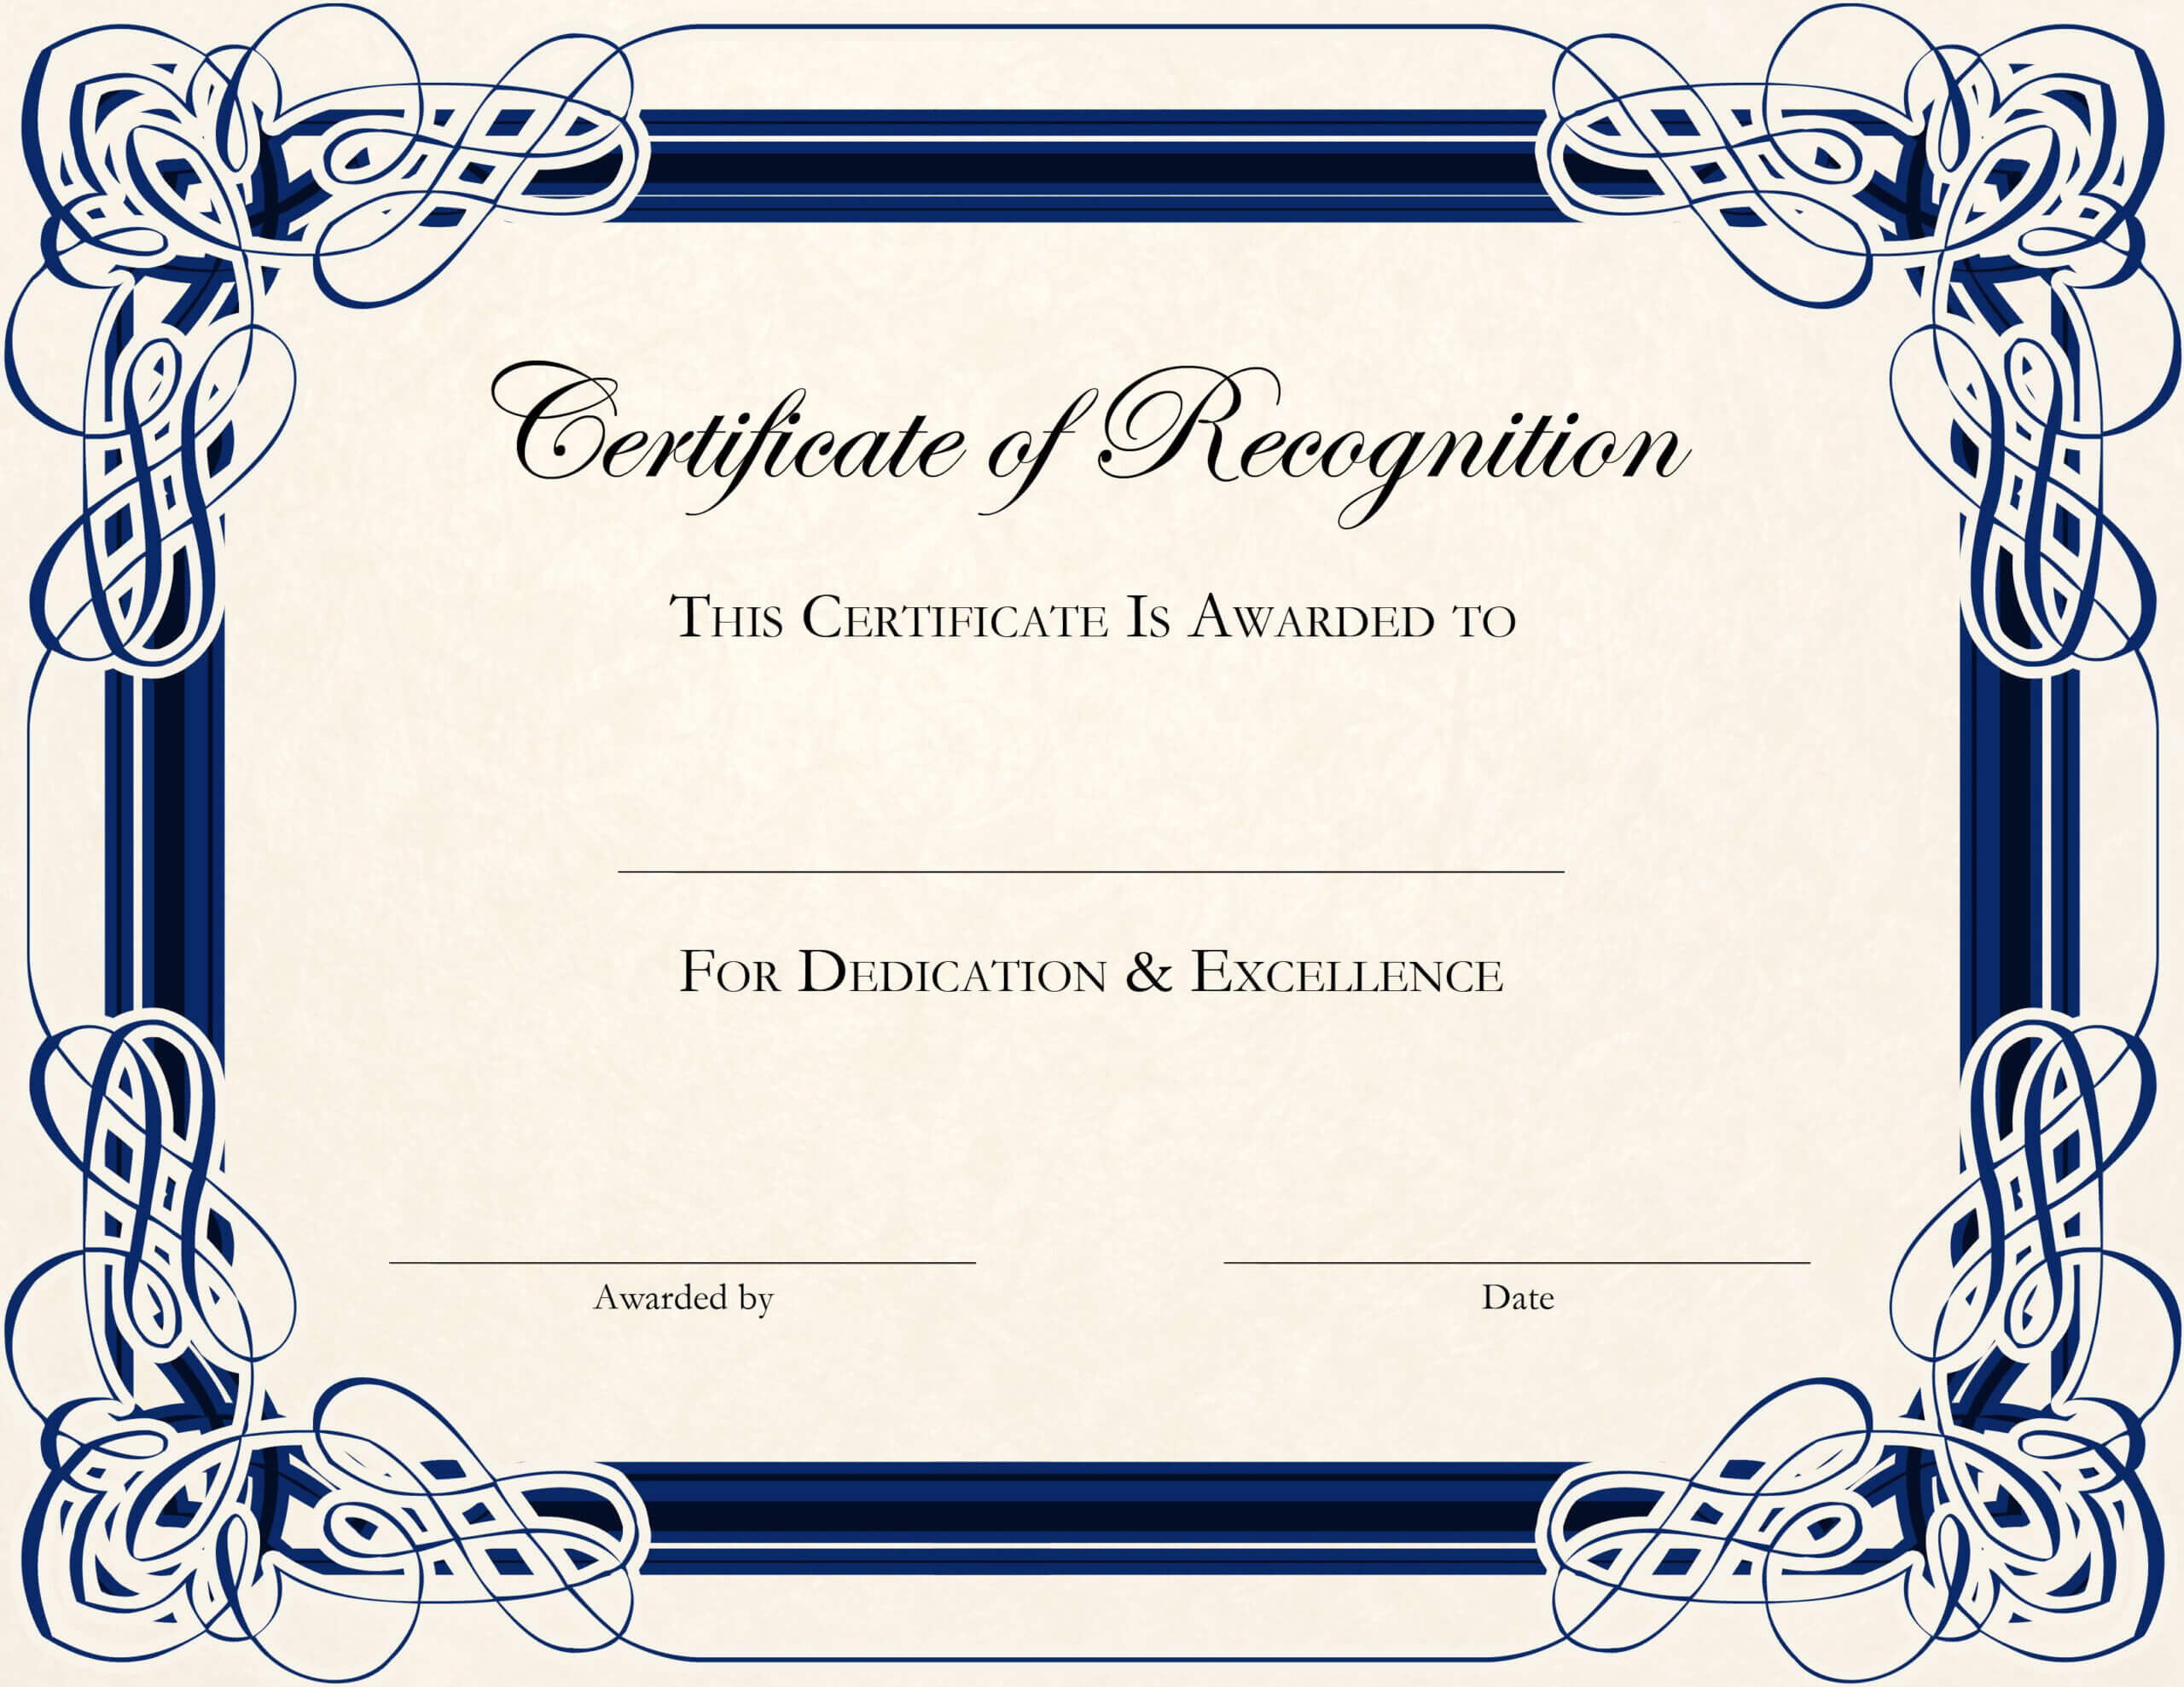 Certificate Template Designs Recognition Docs | Certificate Pertaining To Certificate Of Recognition Word Template